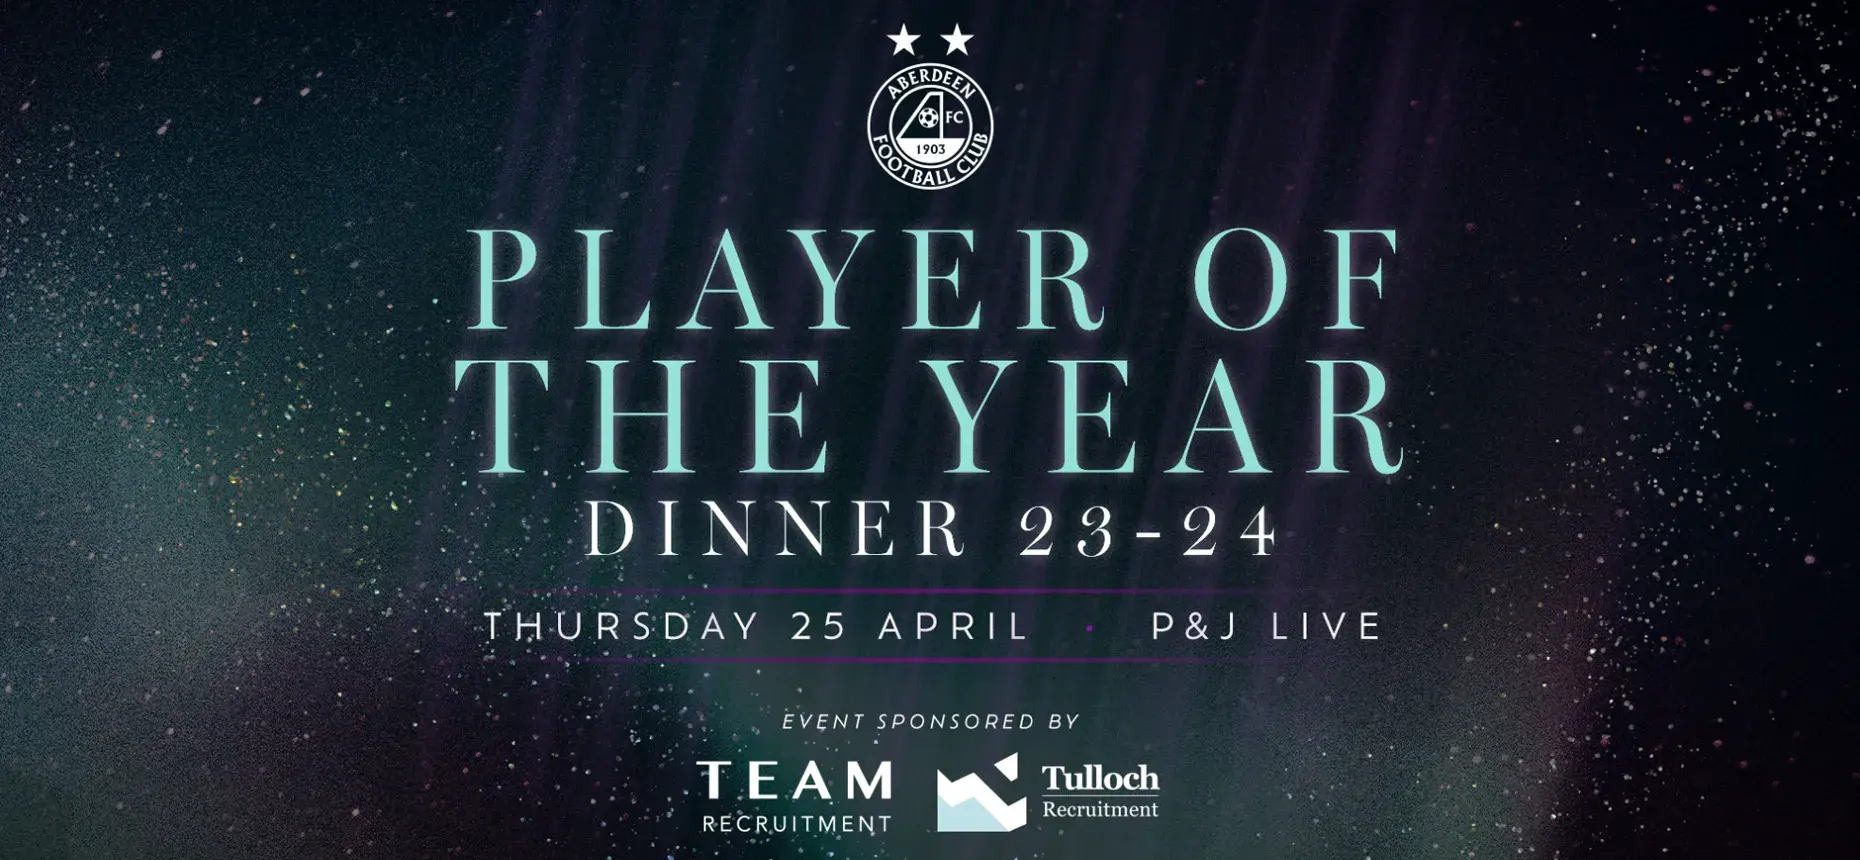 Aberdeen FC Player of the Year Dinner 2023/24 - mw-events